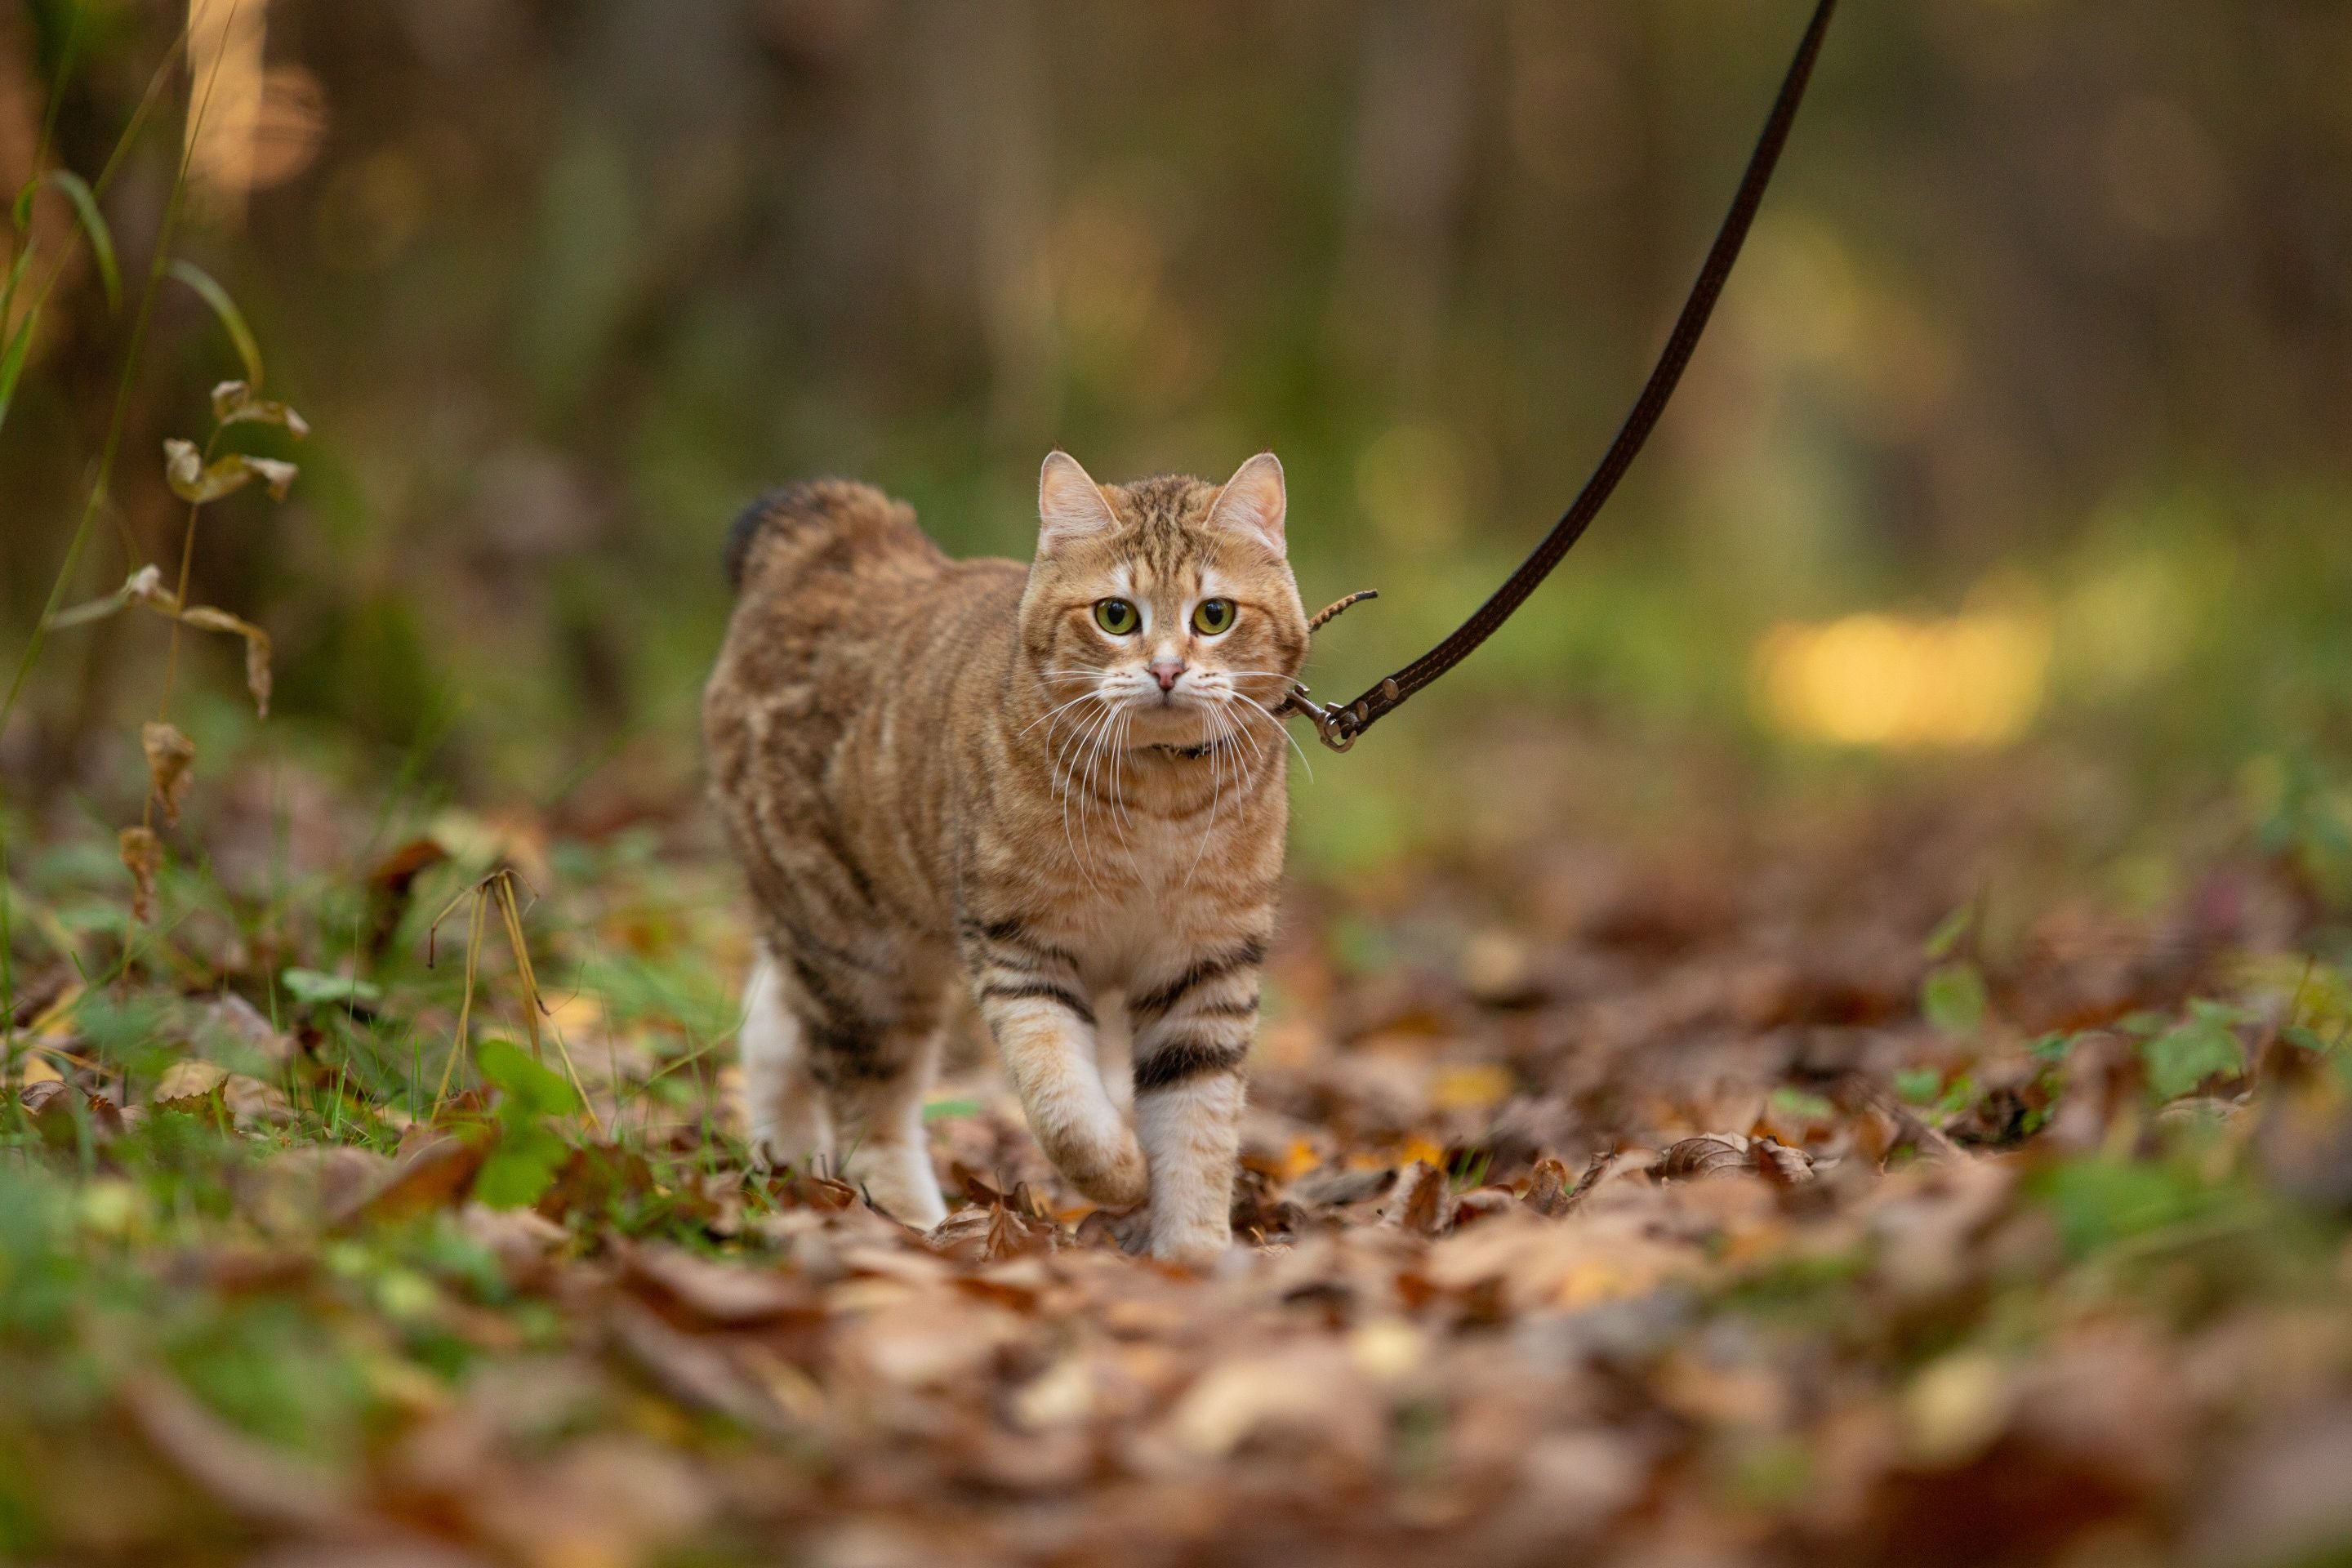 Cat on a leash